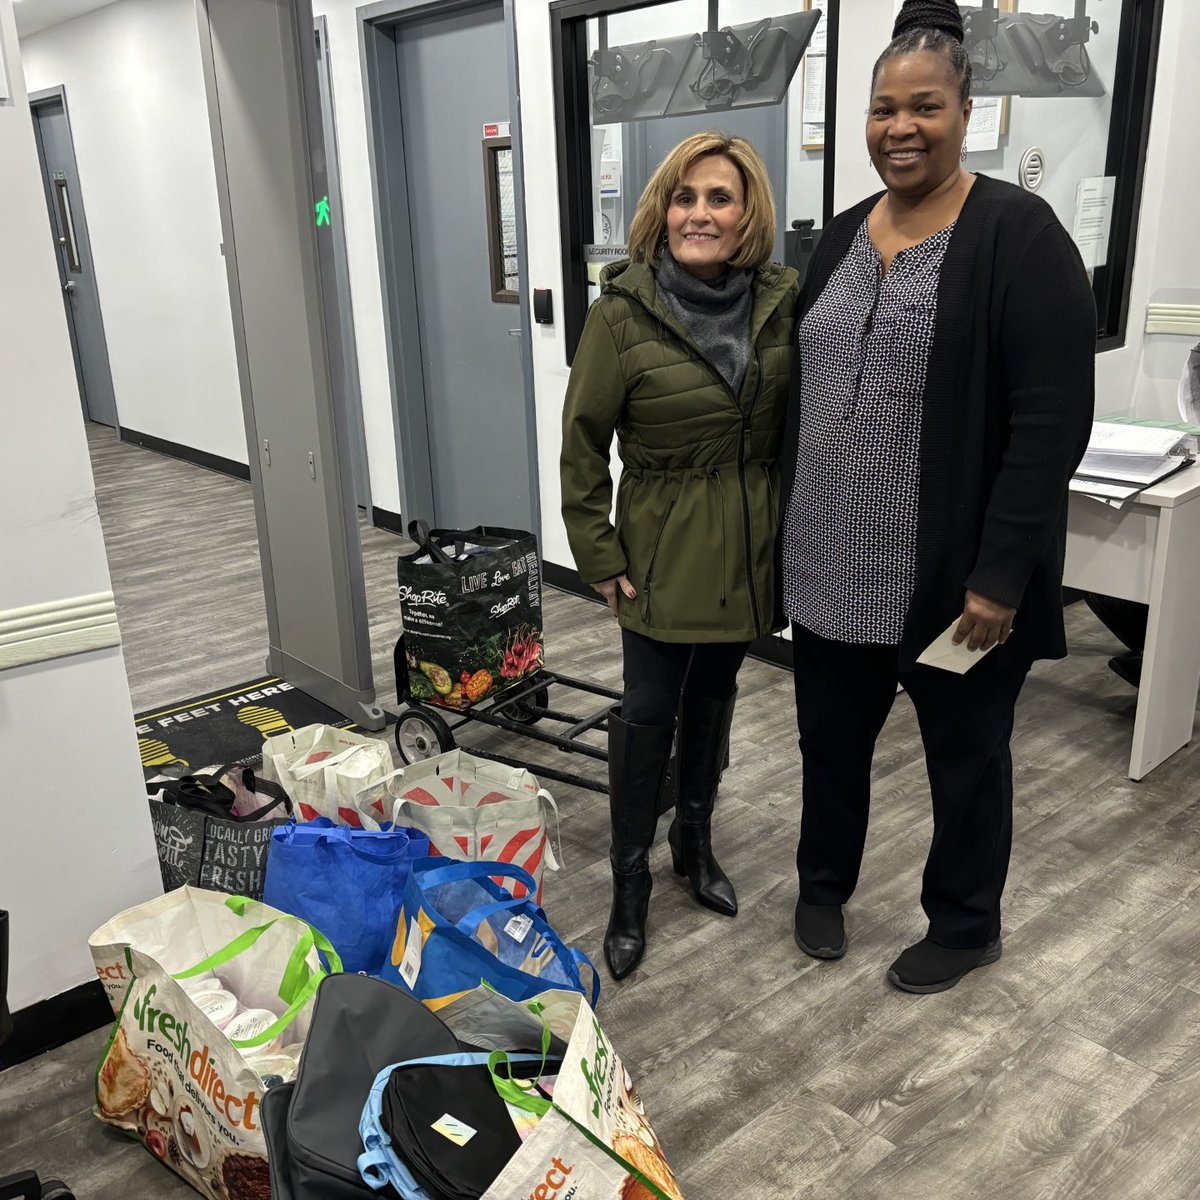 Staff & clients at our #Douglaston #womenshelter are grateful for the personal care items donated by @Philoptochos1 (LPS) of @StNicholasWTC in #FlushingNY. Thx to @CMvpaladino for your Town Hall intro! 
Photo: Stephanie Moskos (LPS) & Robin Glenn (Prog. Dir., Douglaston shelter).